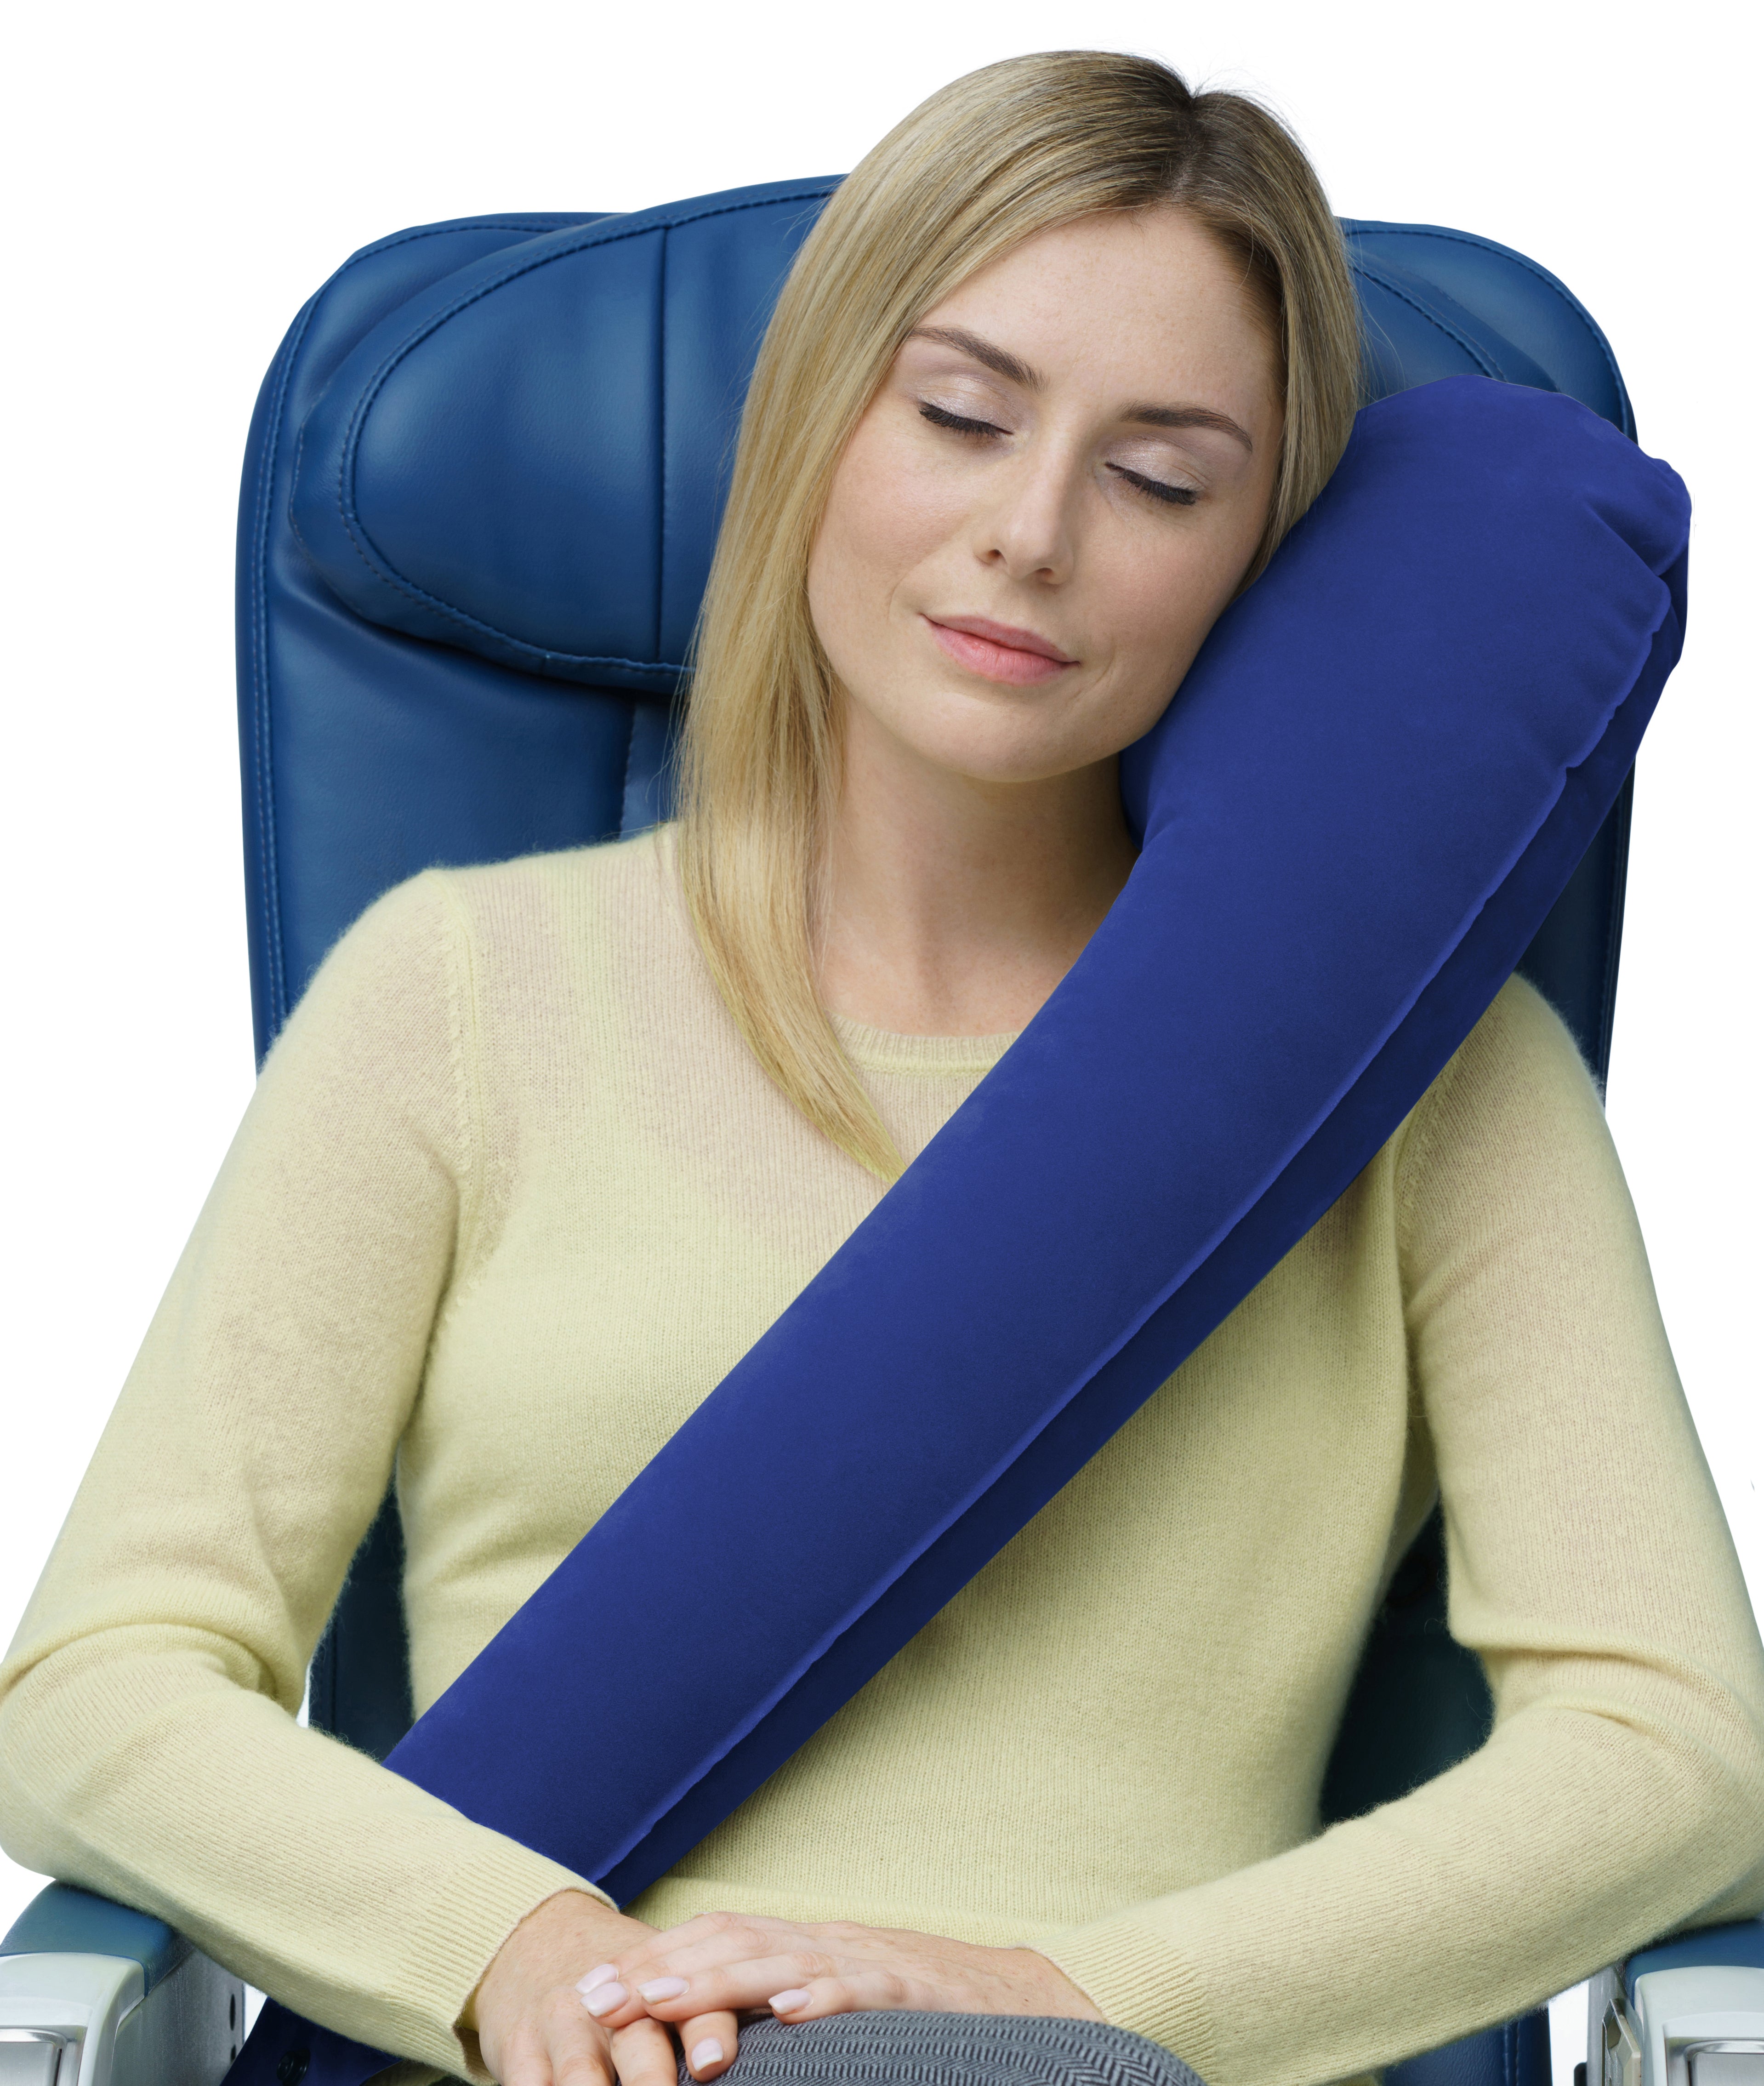 melbourne airport travel pillow